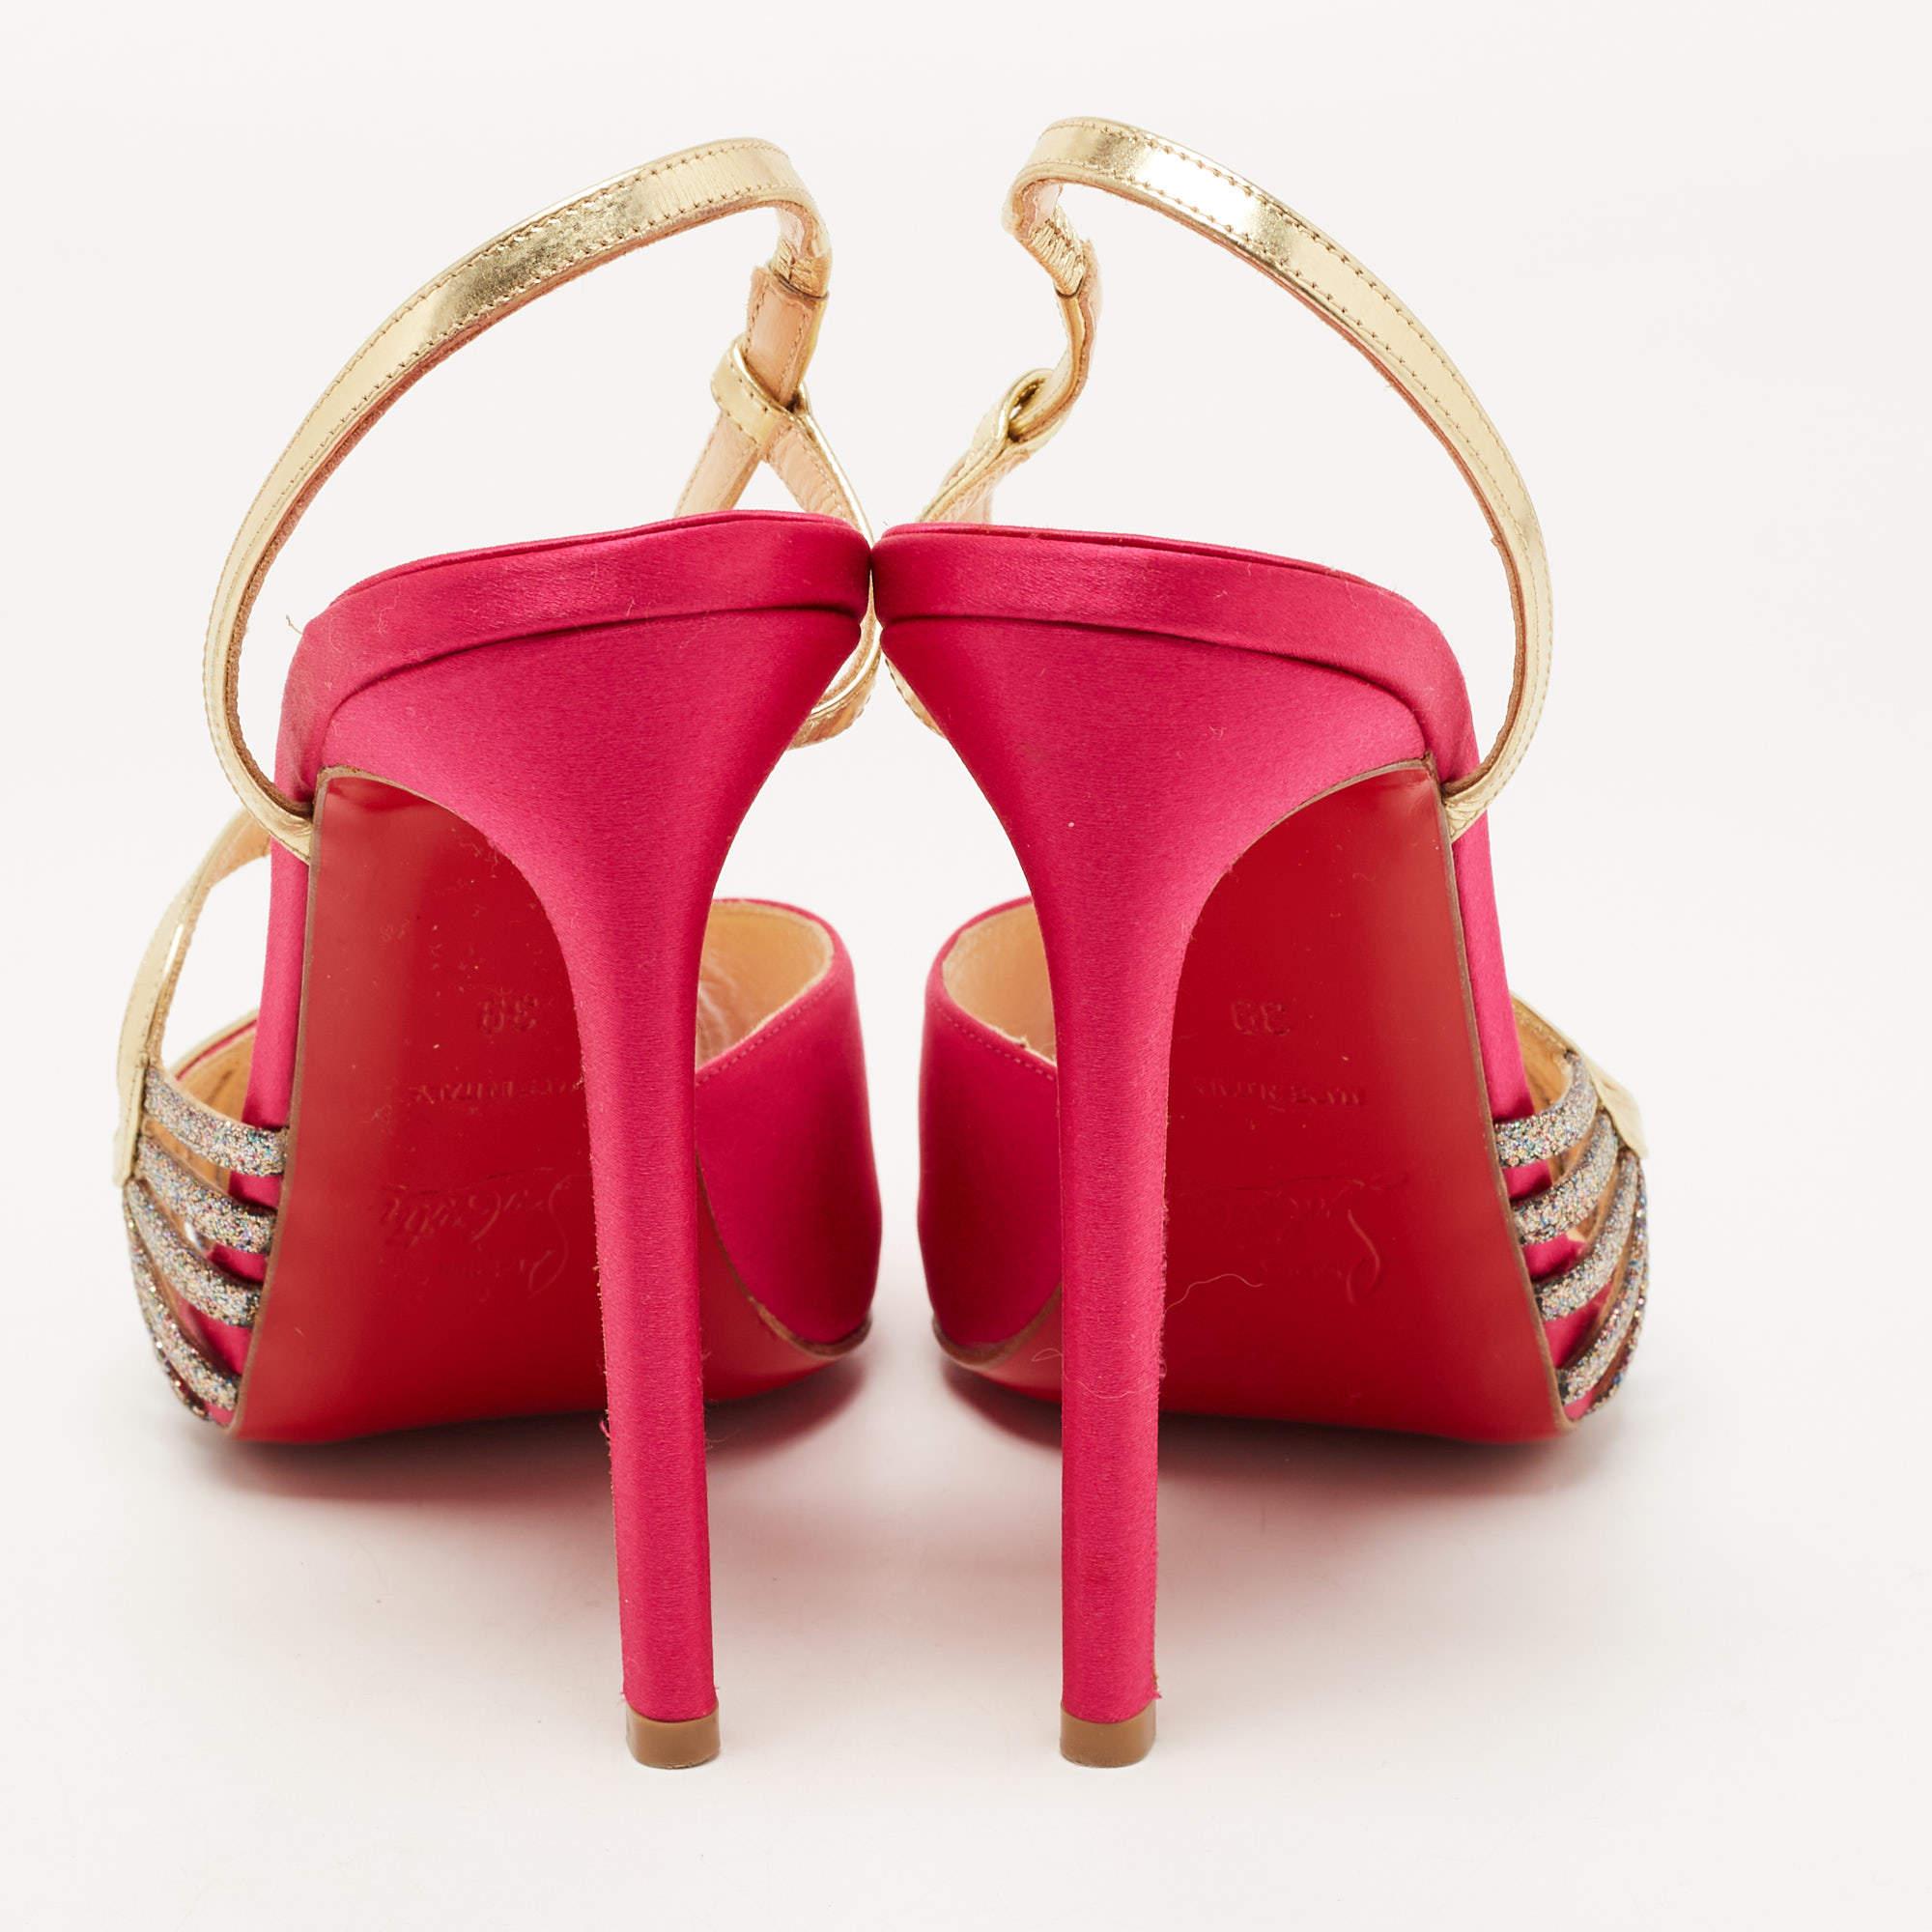 Christian Louboutin Pink/Gold Satin, Leather and Glitter Strappy Sandals Size 39 1